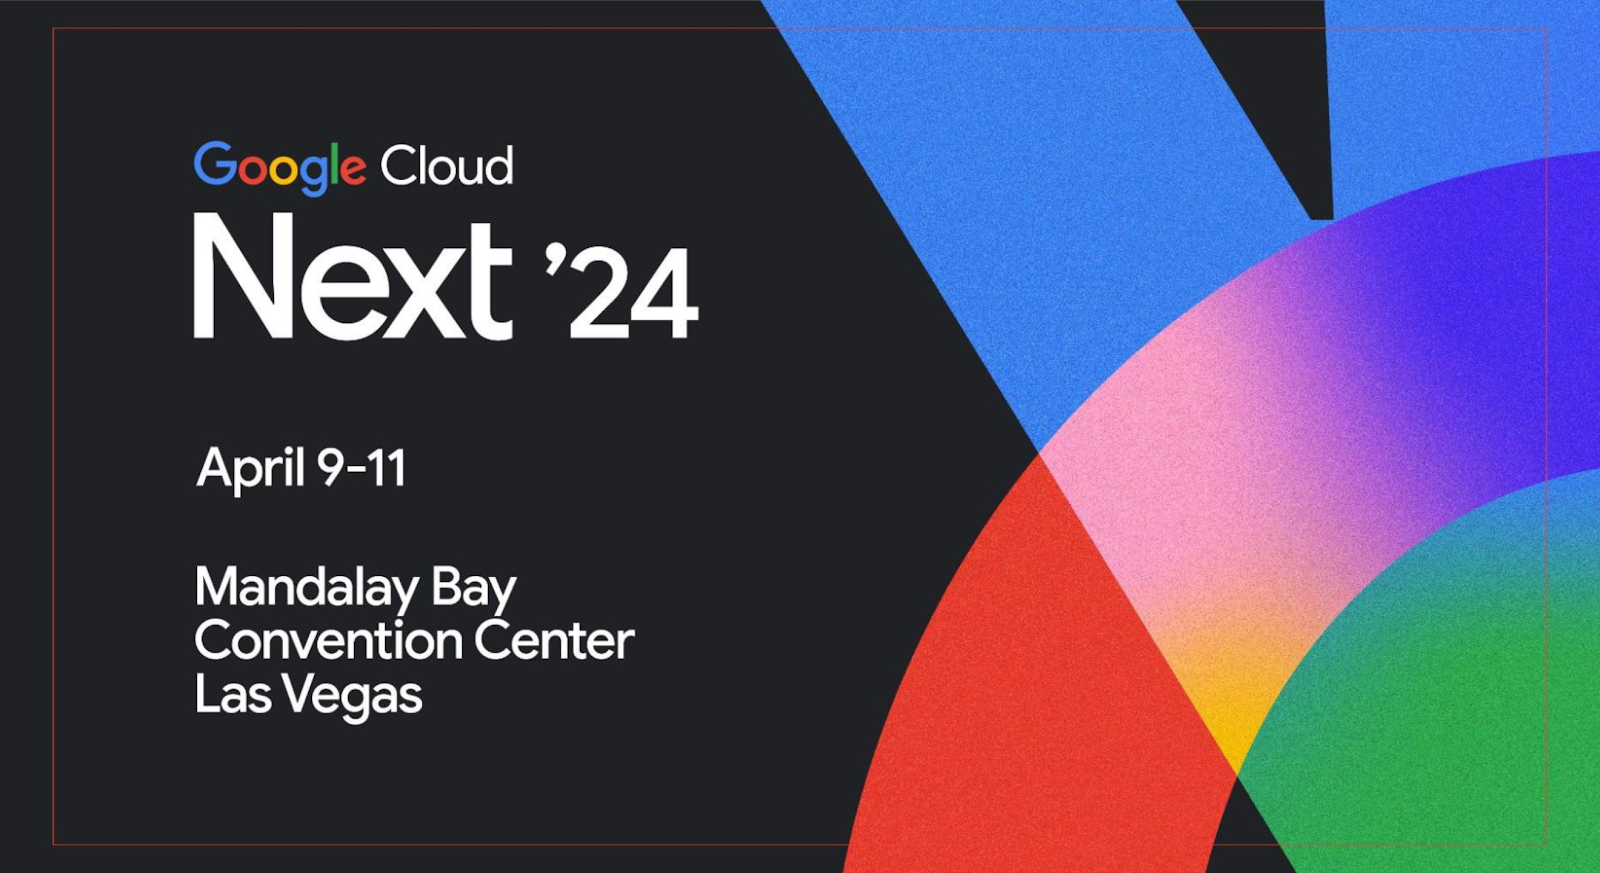 Google Cloud Next '24 session library is now available